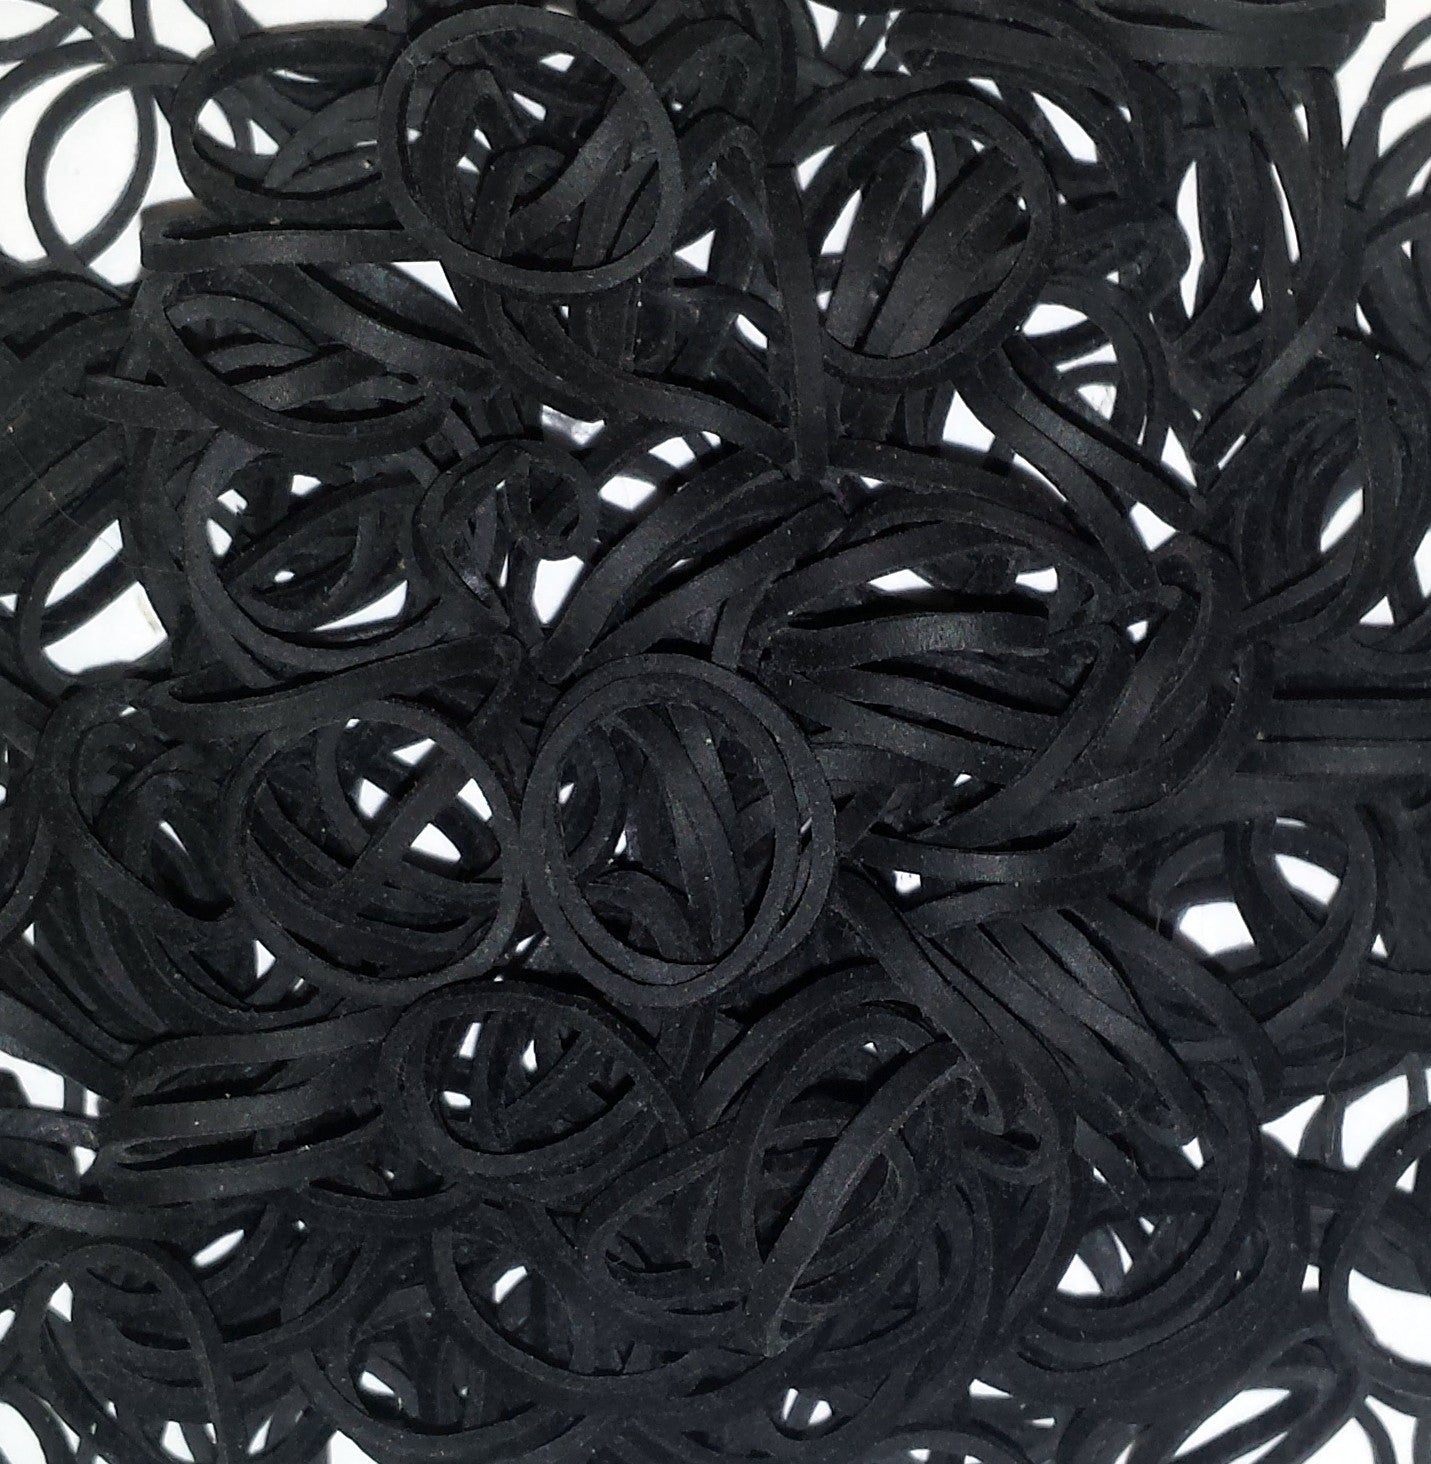 500 Count Rubber Bands in Re-Closable Container for Ponytails and Braids (Black)